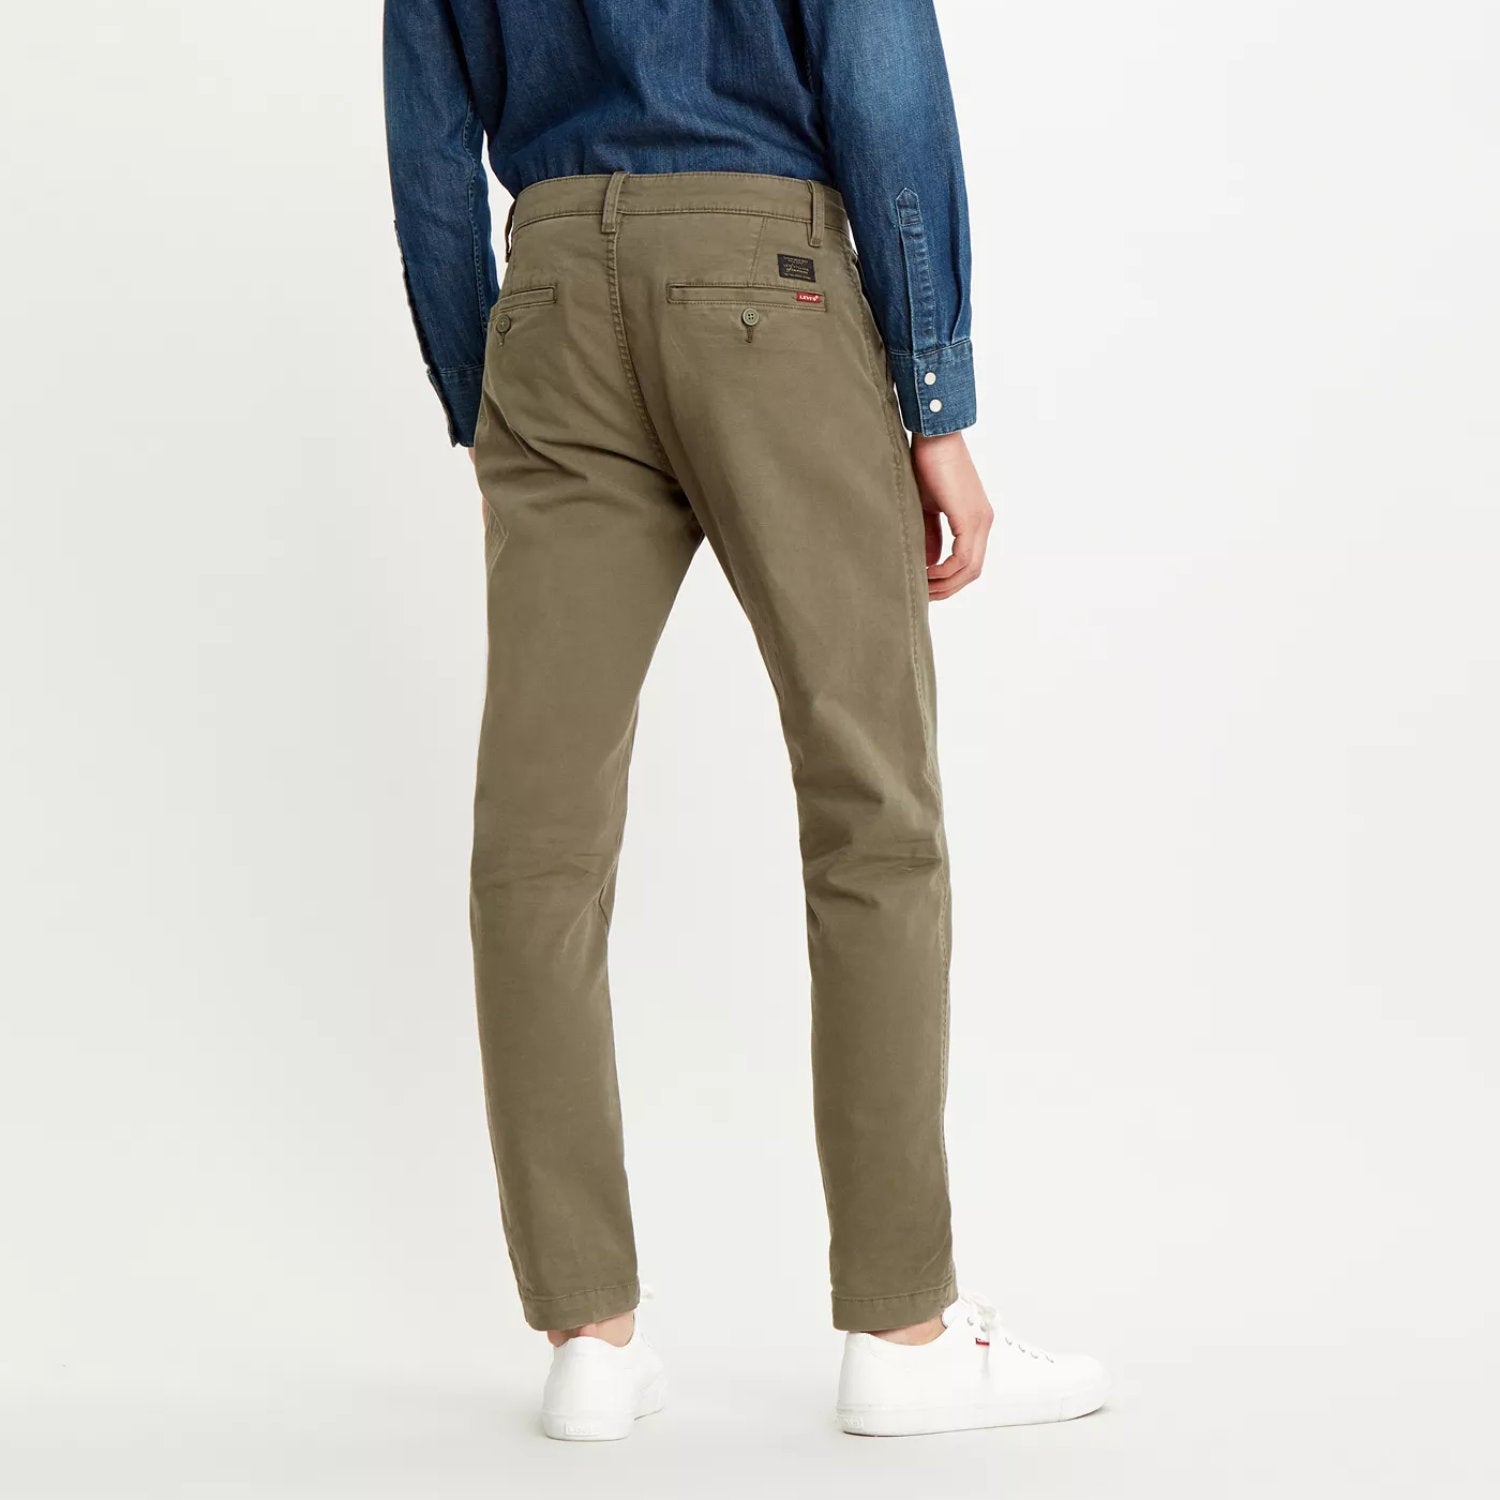 Levis Xx Standard Taper Chino Pants - Shady - 3 - Bottoms - Casual Pants